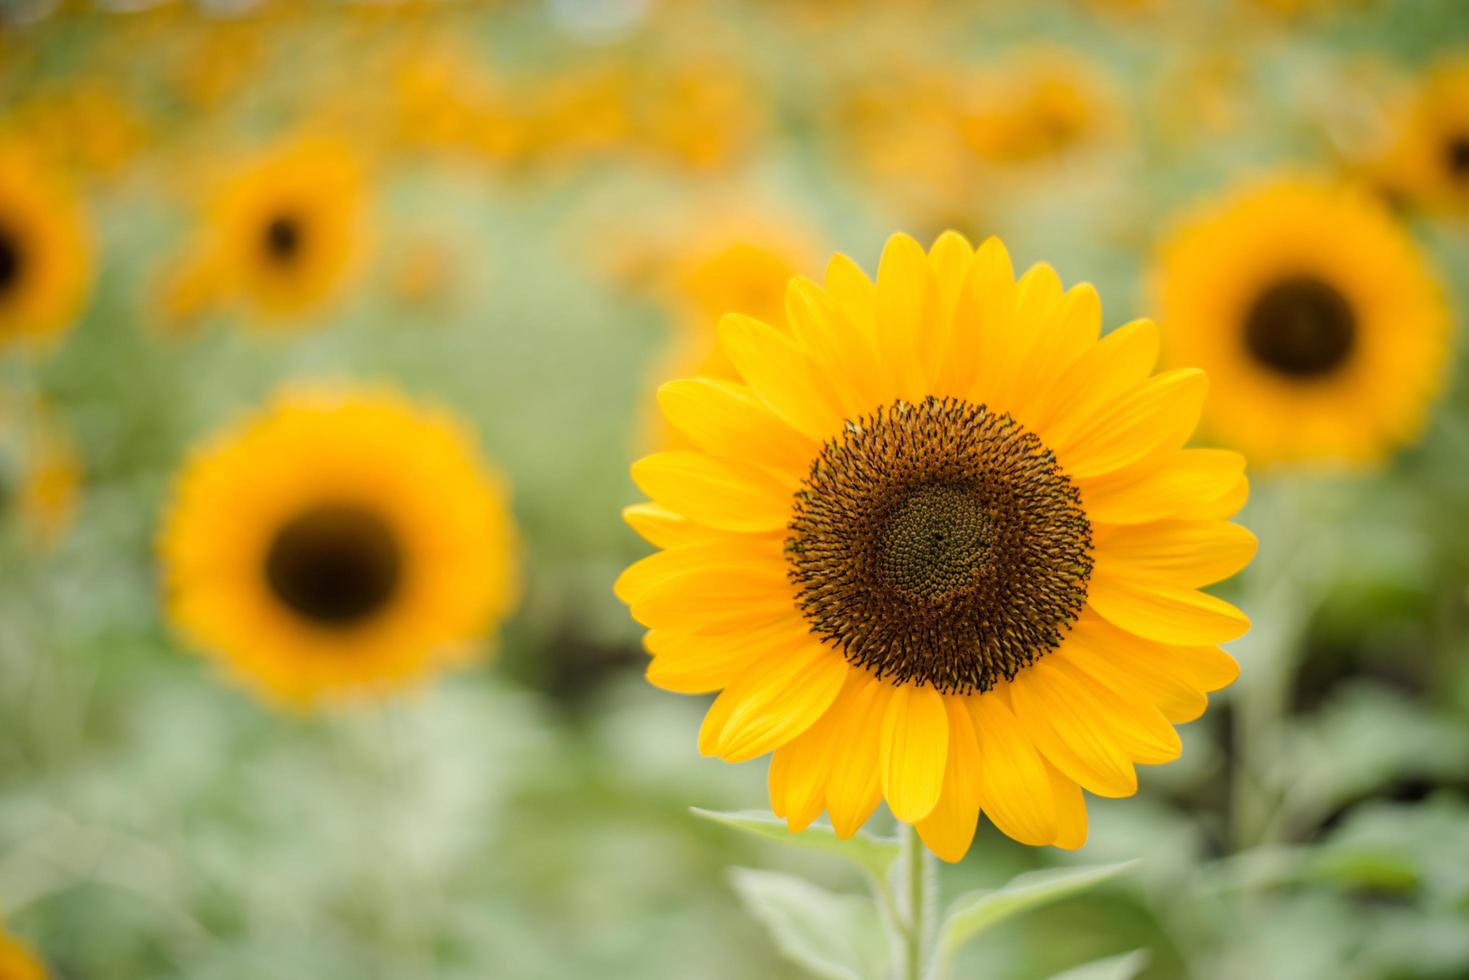 Close-up of a blooming sunflower in a field with blurred nature background photo